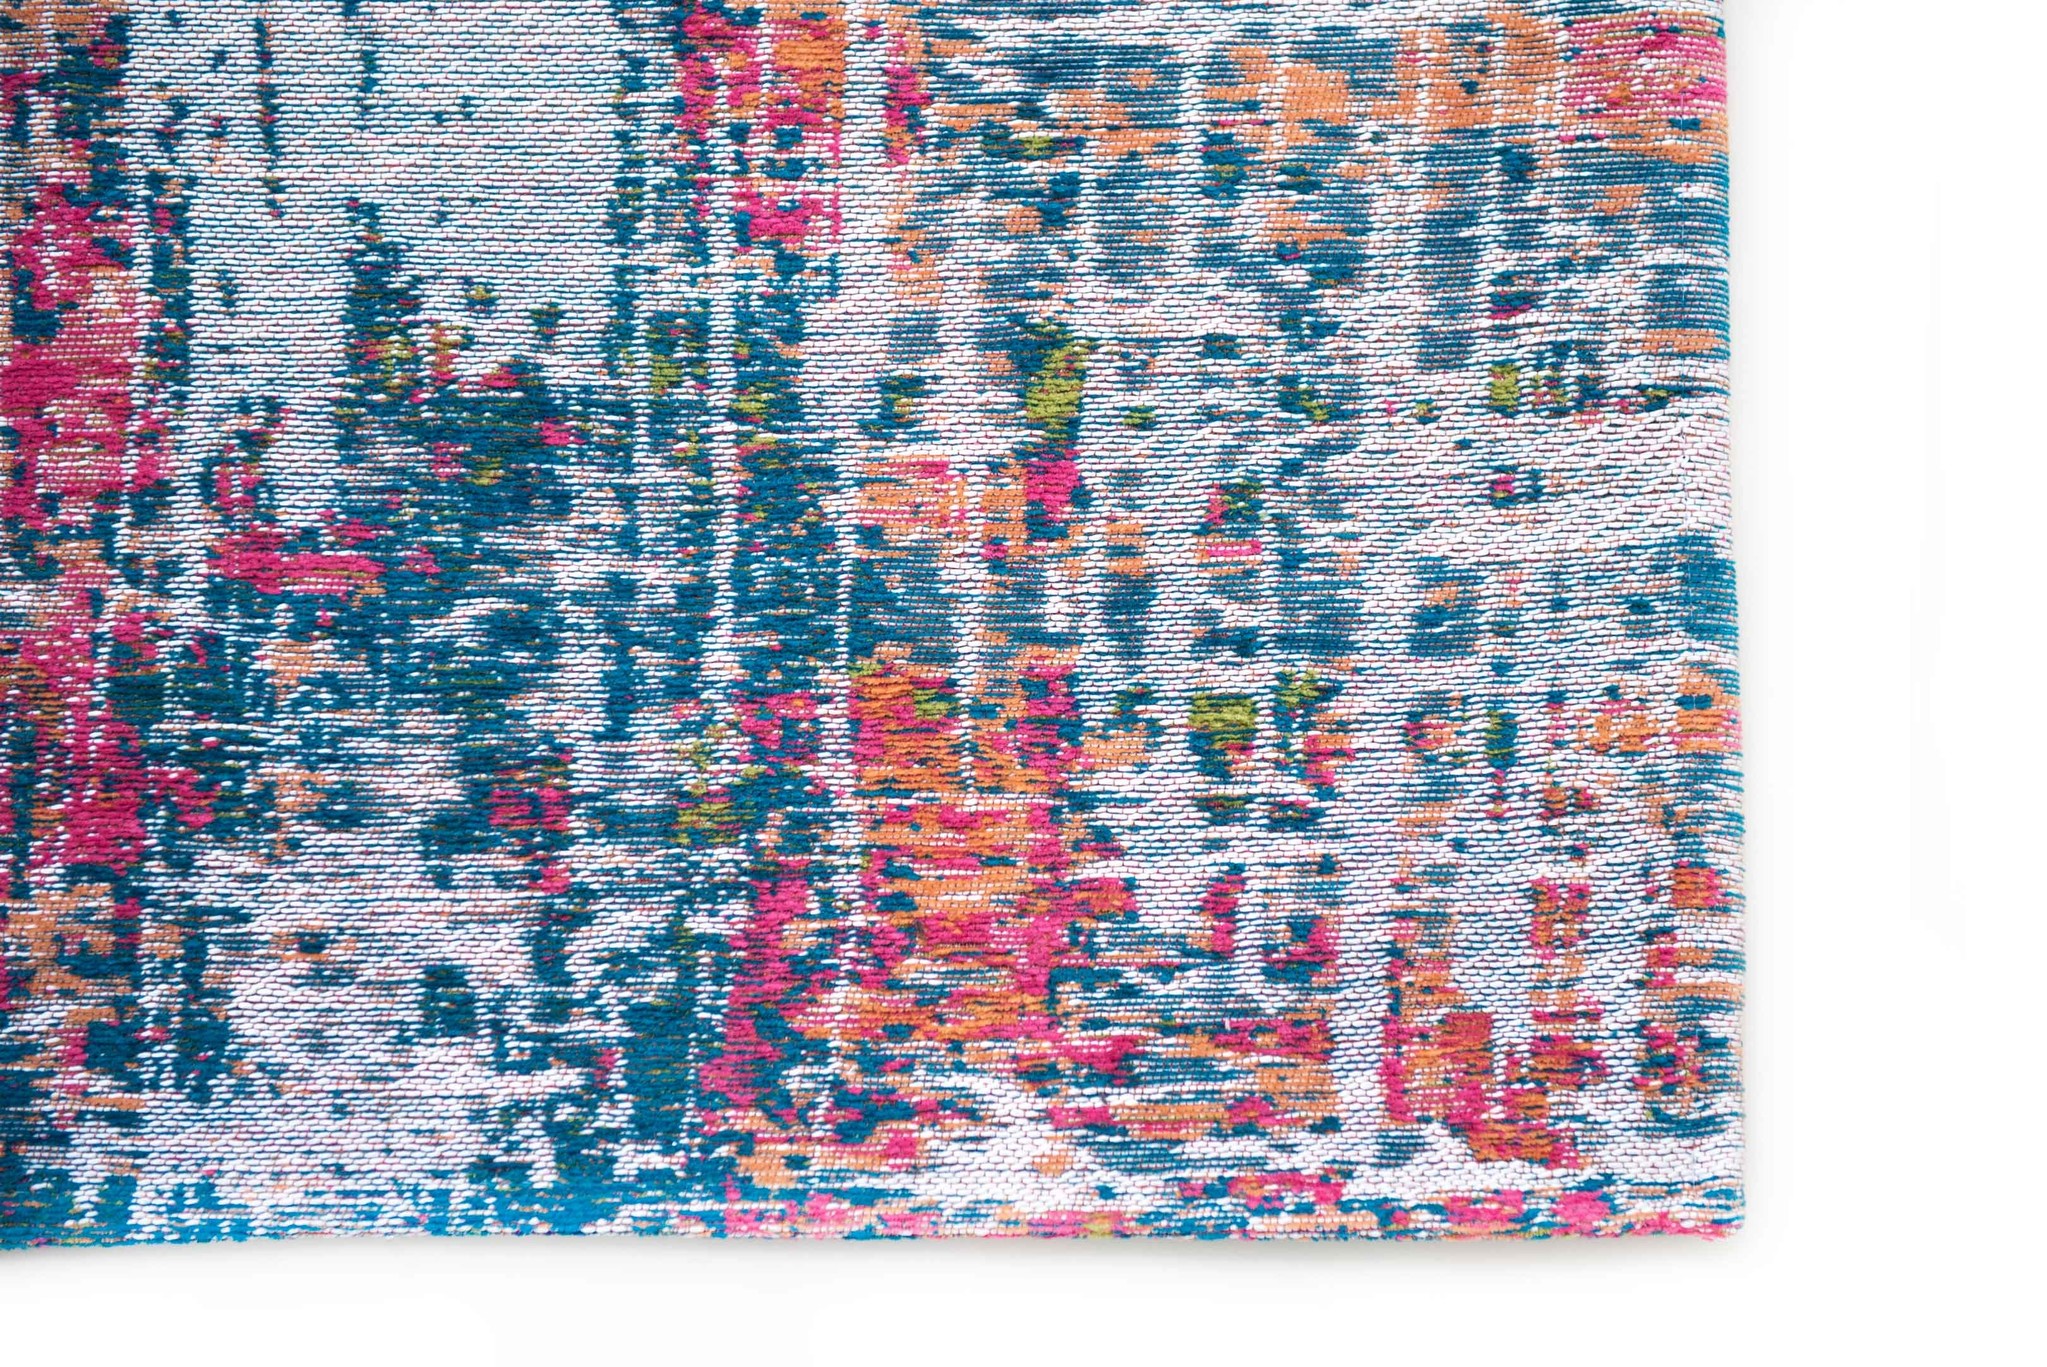 Abstract Multi Flatwoven Rug ☞ Size: 2' 7" x 5' (80 x 150 cm)